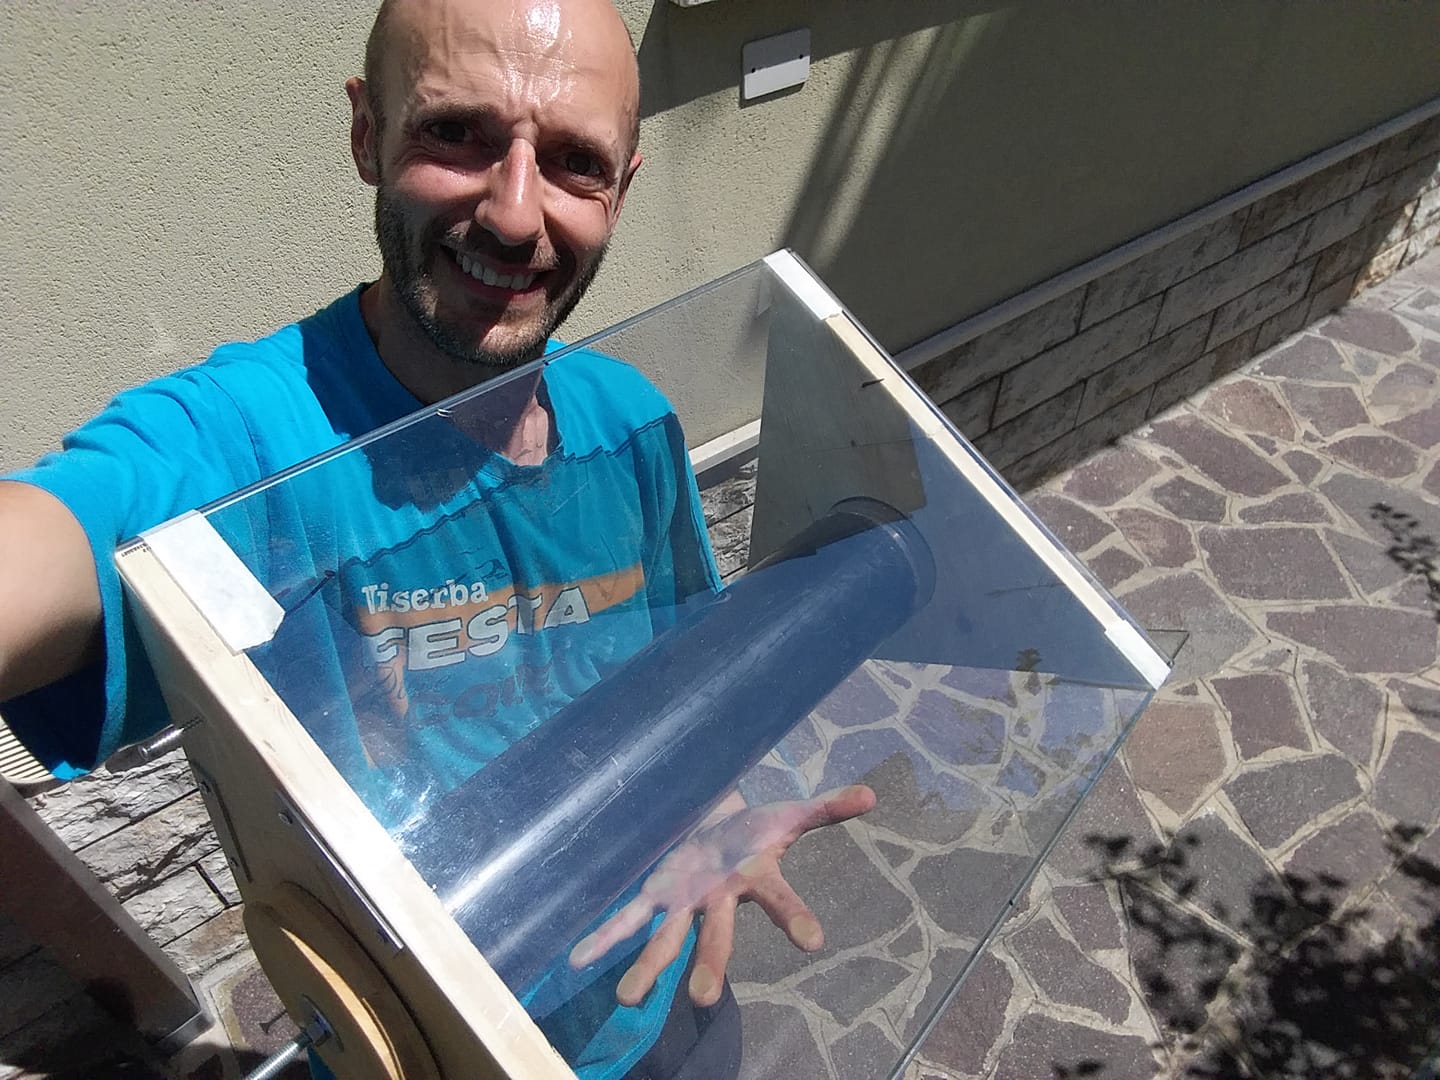 https://static.wikia.nocookie.net/solarcooking/images/d/dc/Matteo_Muccioli_August_2019.jpg/revision/latest?cb=20190815160049